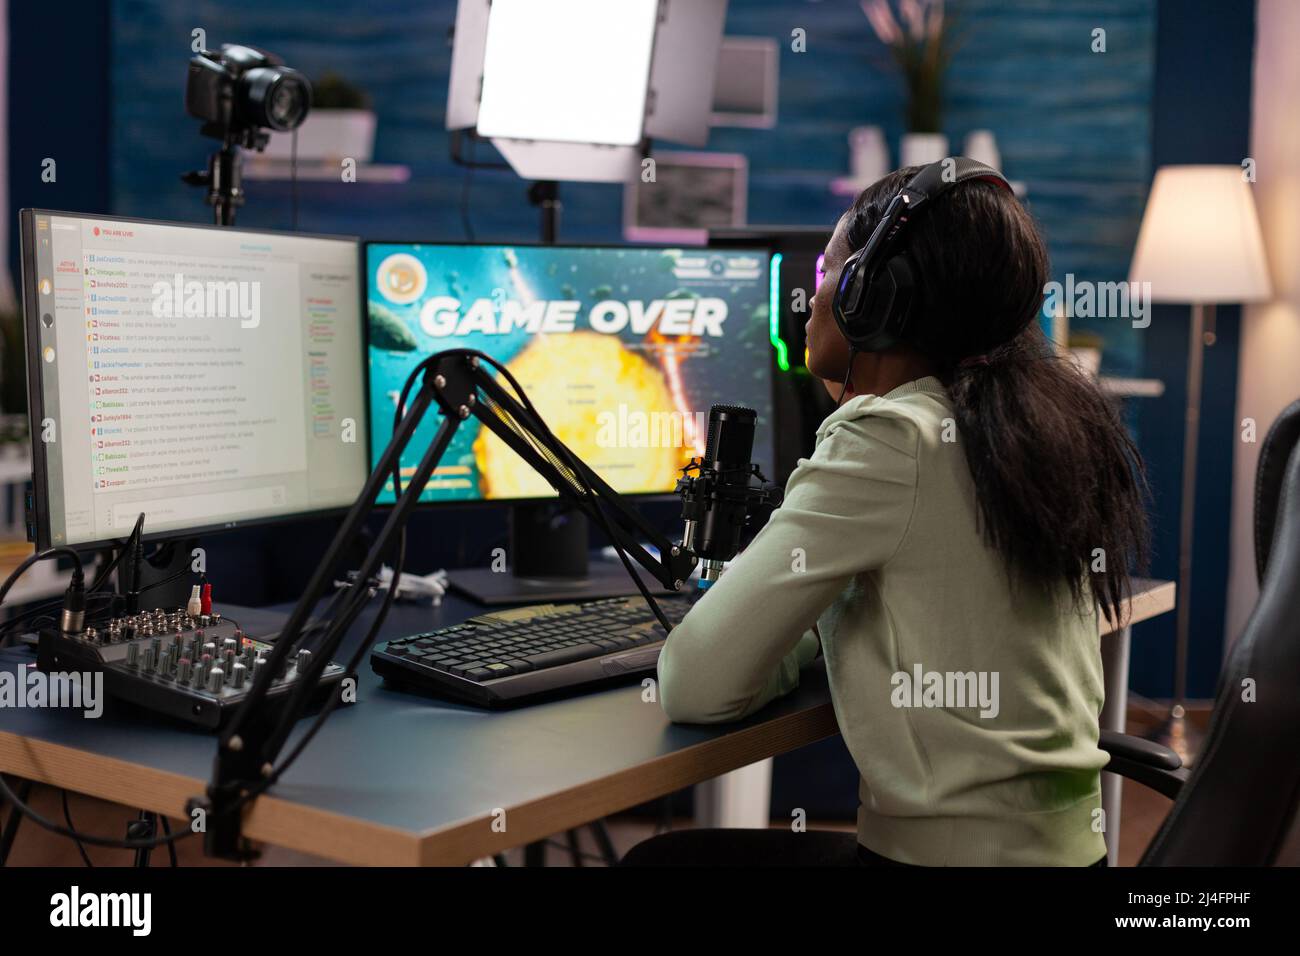 Sad nervous pro gamer sitting at gaming desk playing space shooter videogames losing online games championship. Upset esport woman streaming live using RGB computer equipment, Game over on screen Stock Photo